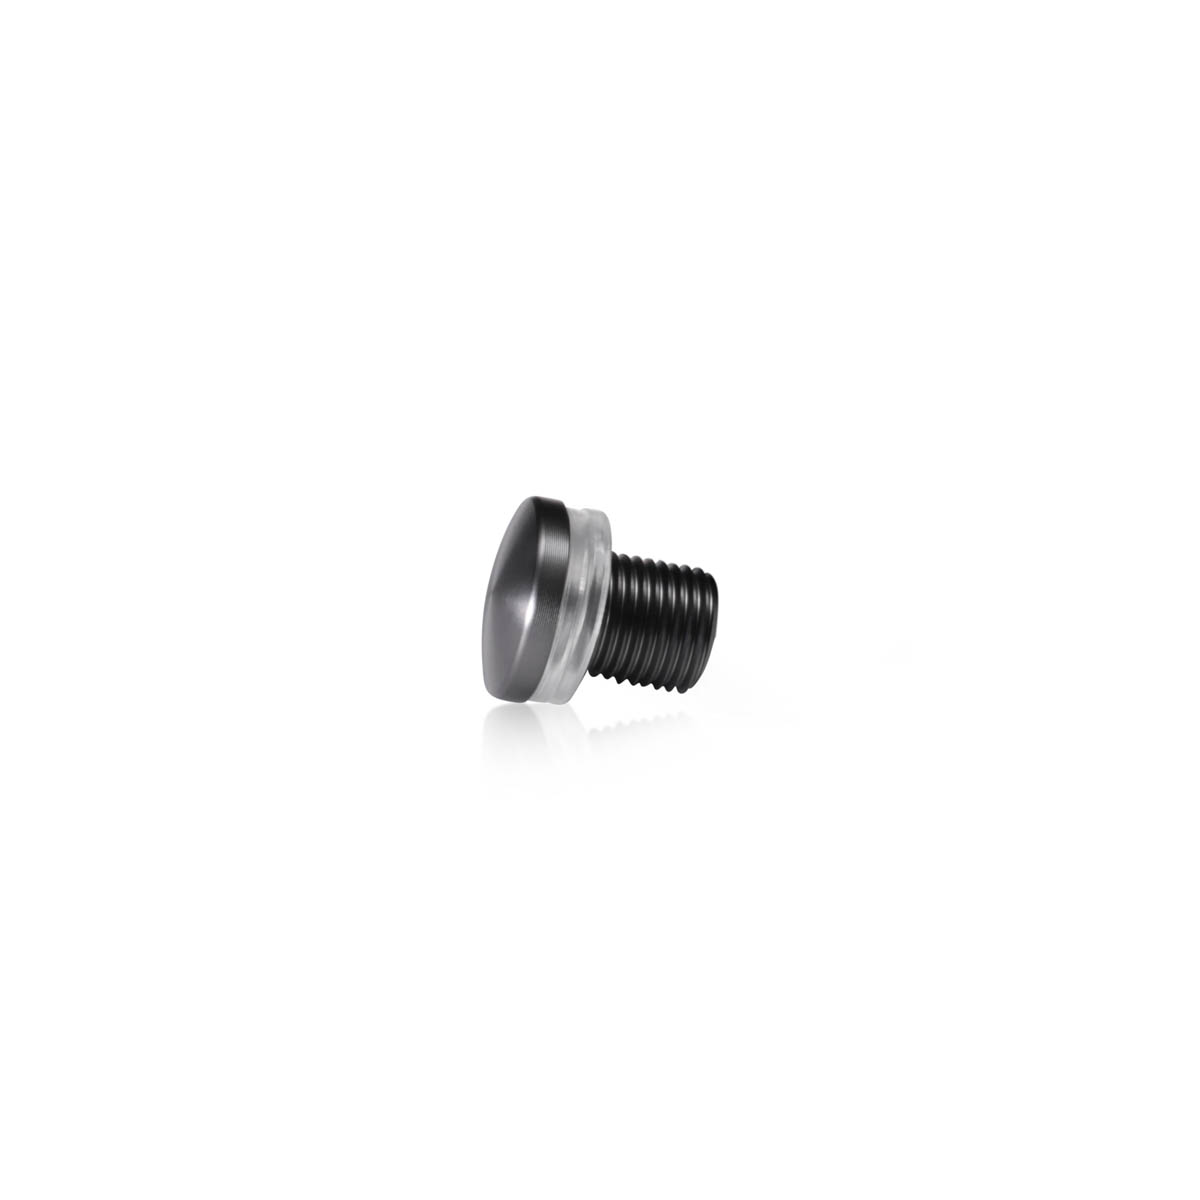 AL16-12T Head replacement for Mbs-Standoffs 5/8'' Diameter x 1/2'' Barrel Length, Aluminum Titanium Anodized Finish Standoffs (Includes 2 Silicone Washers).